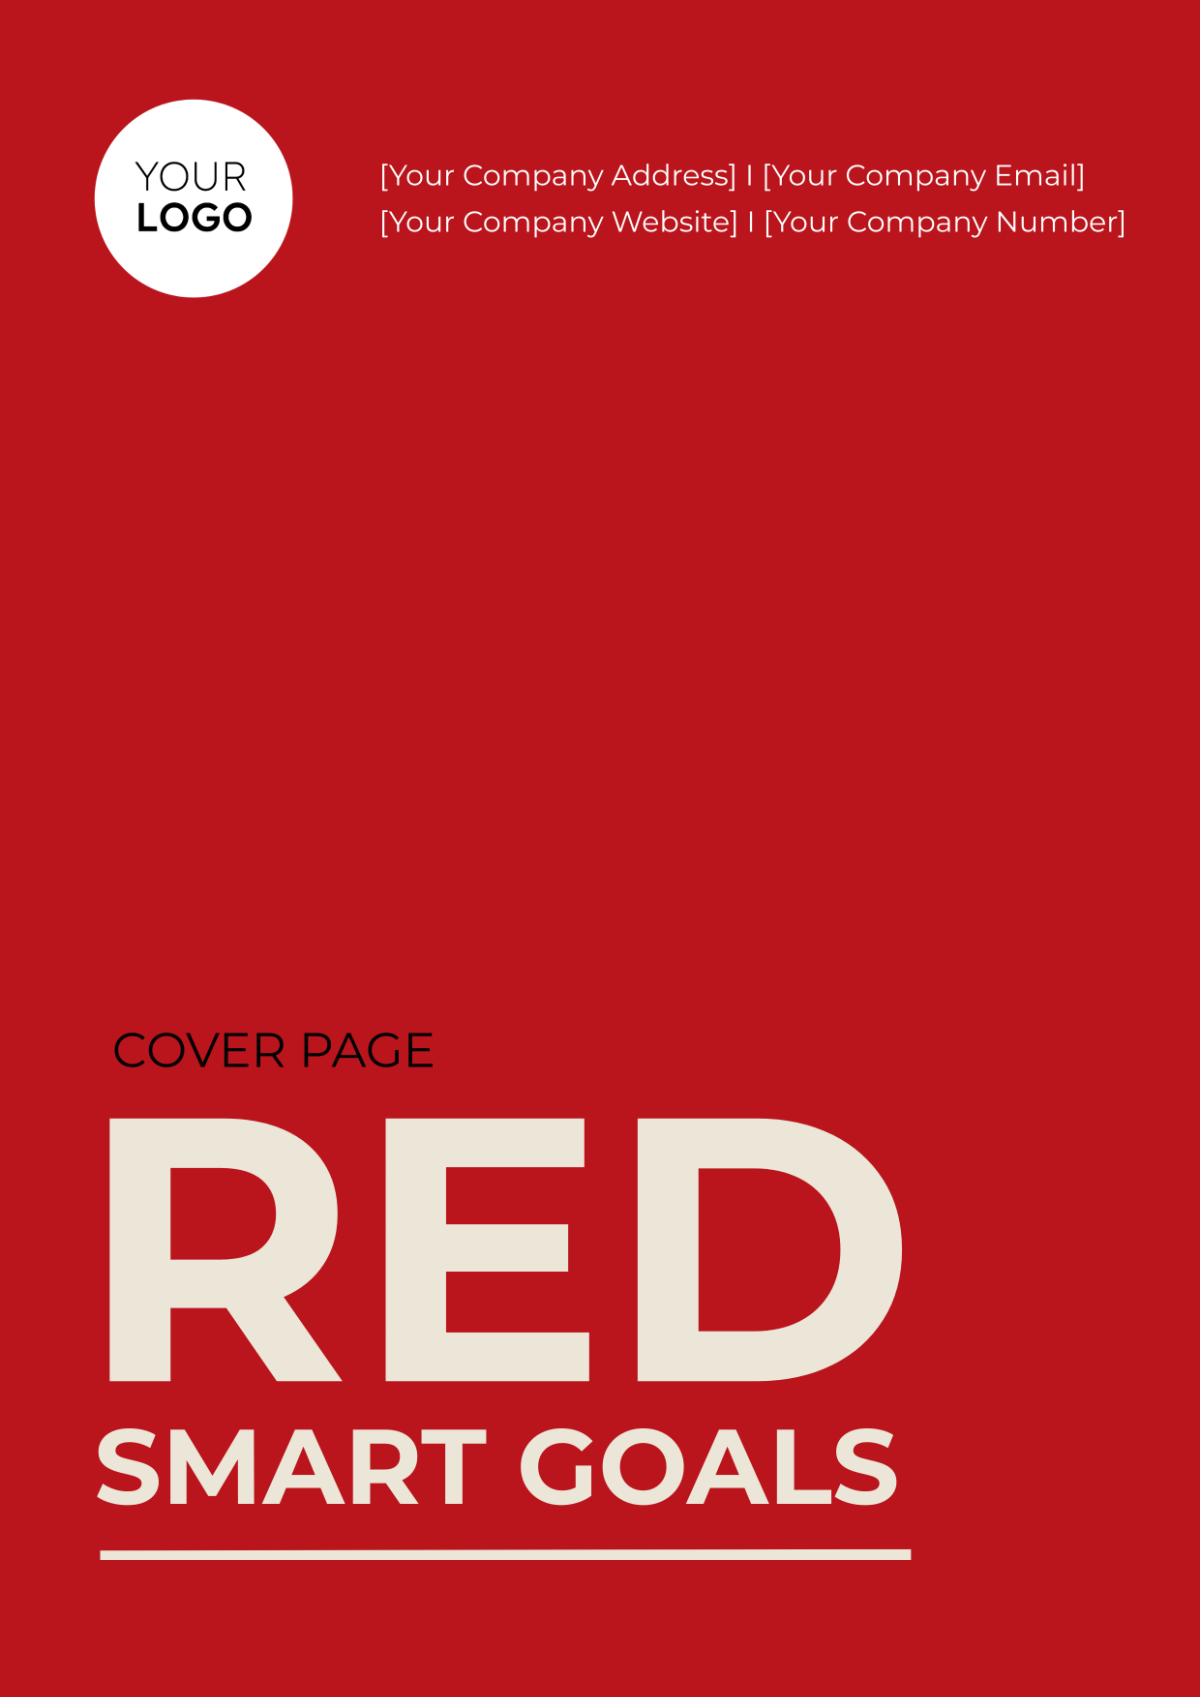 Red SMART Goals Cover Page